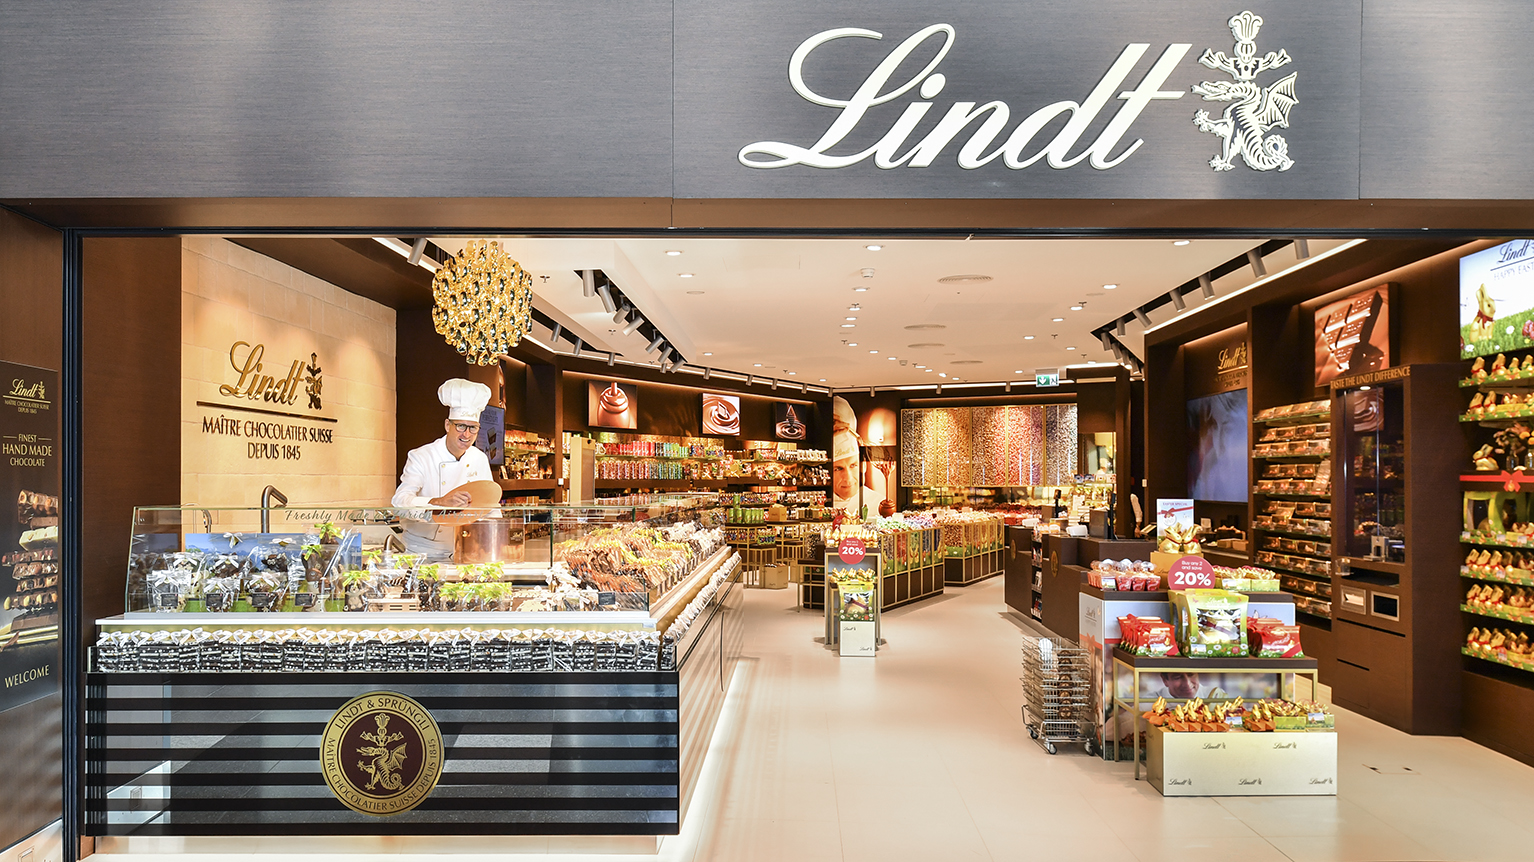 Lindt makes it magical – Advantage Group recognises Lindt & Sprüngli Travel Retail as top confectionery supplier in travel retail in 2019